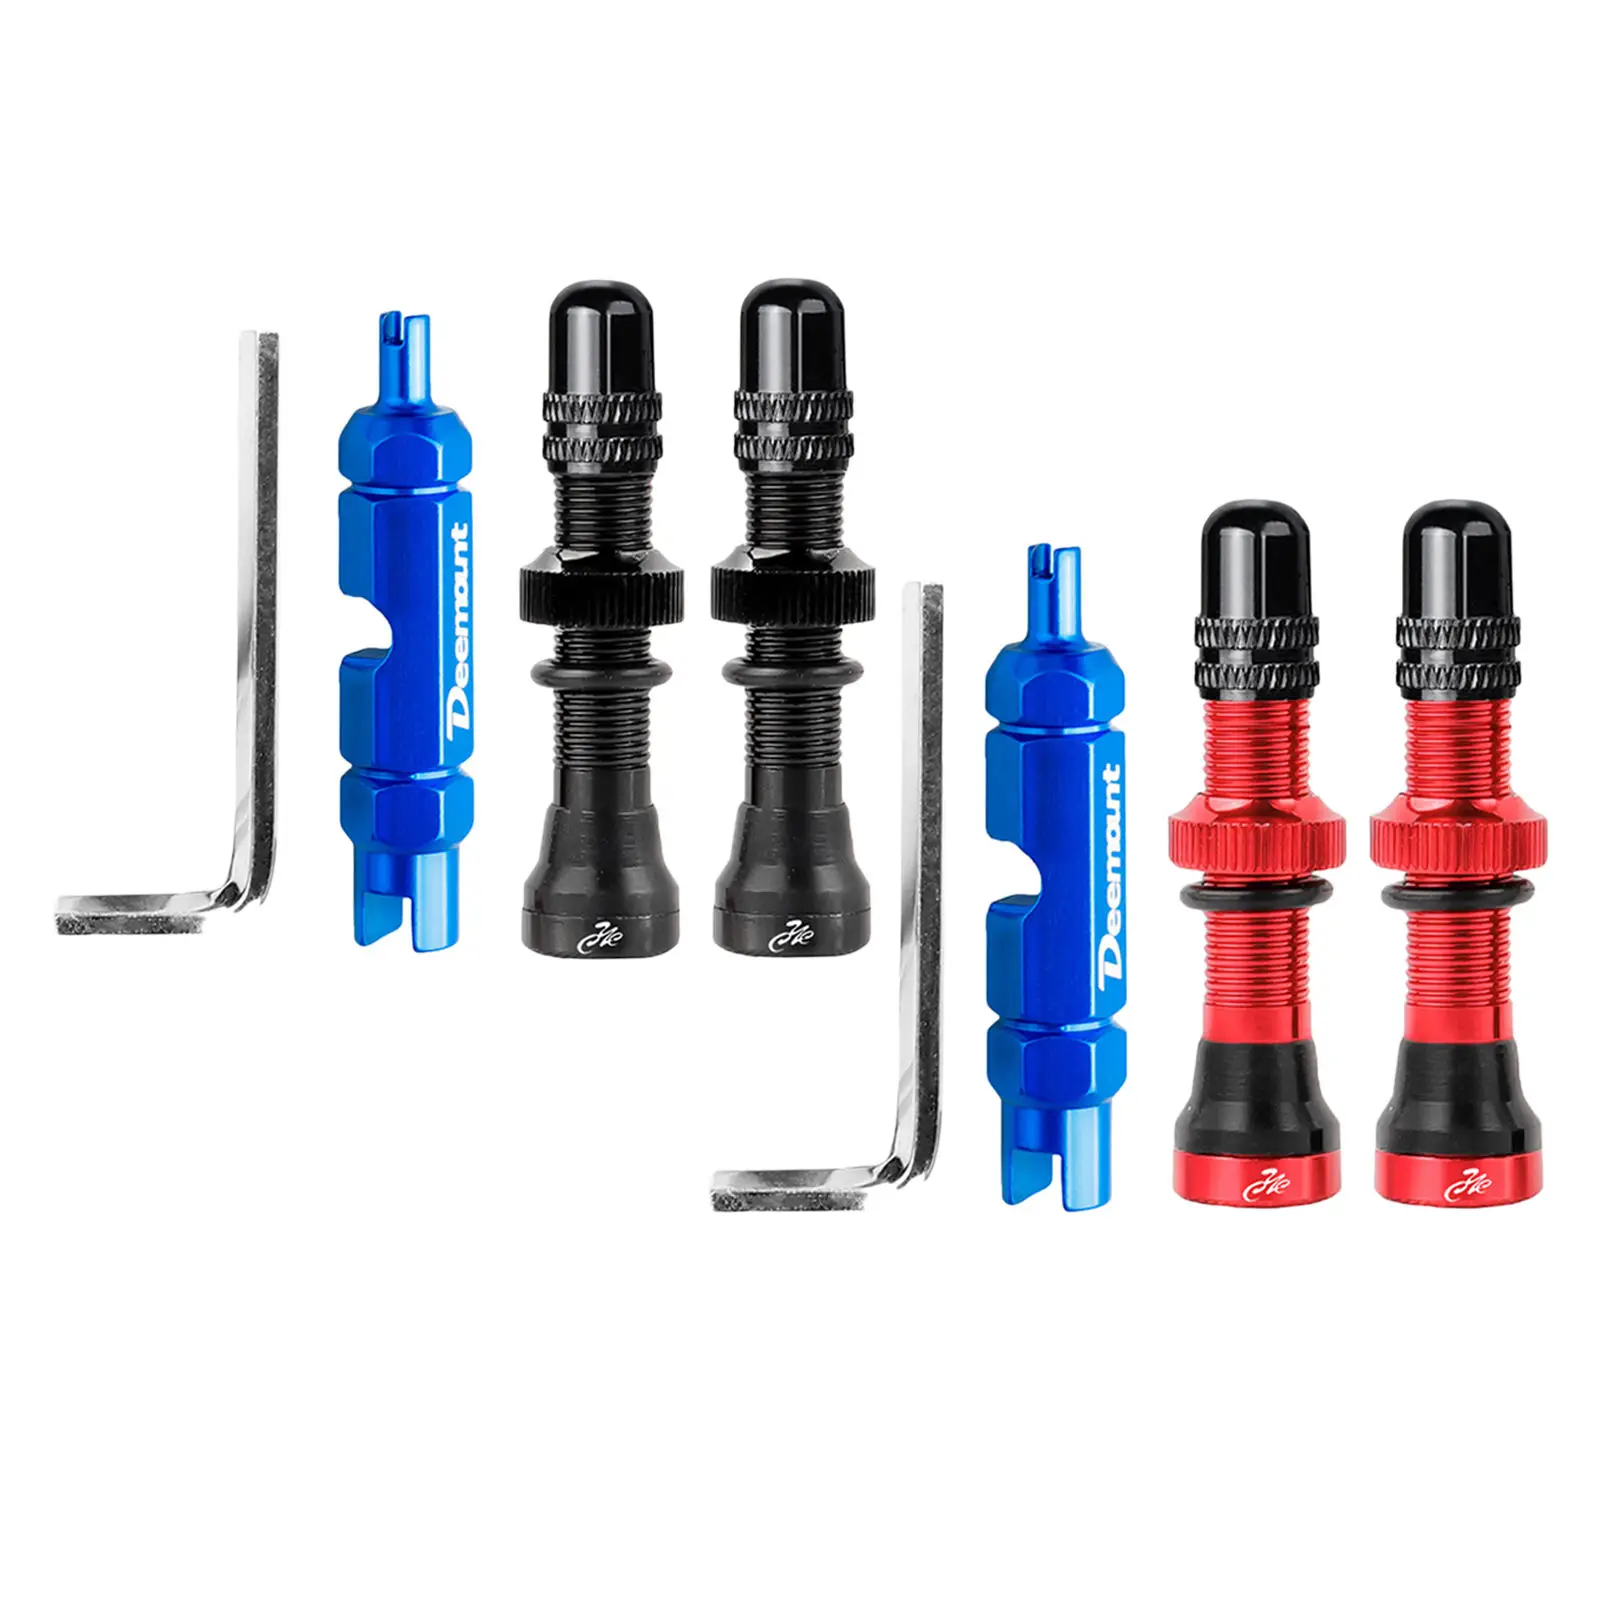 Valve Core Remover Tool Kit Bicycle Valve Core for Bike Bicycle Accessories